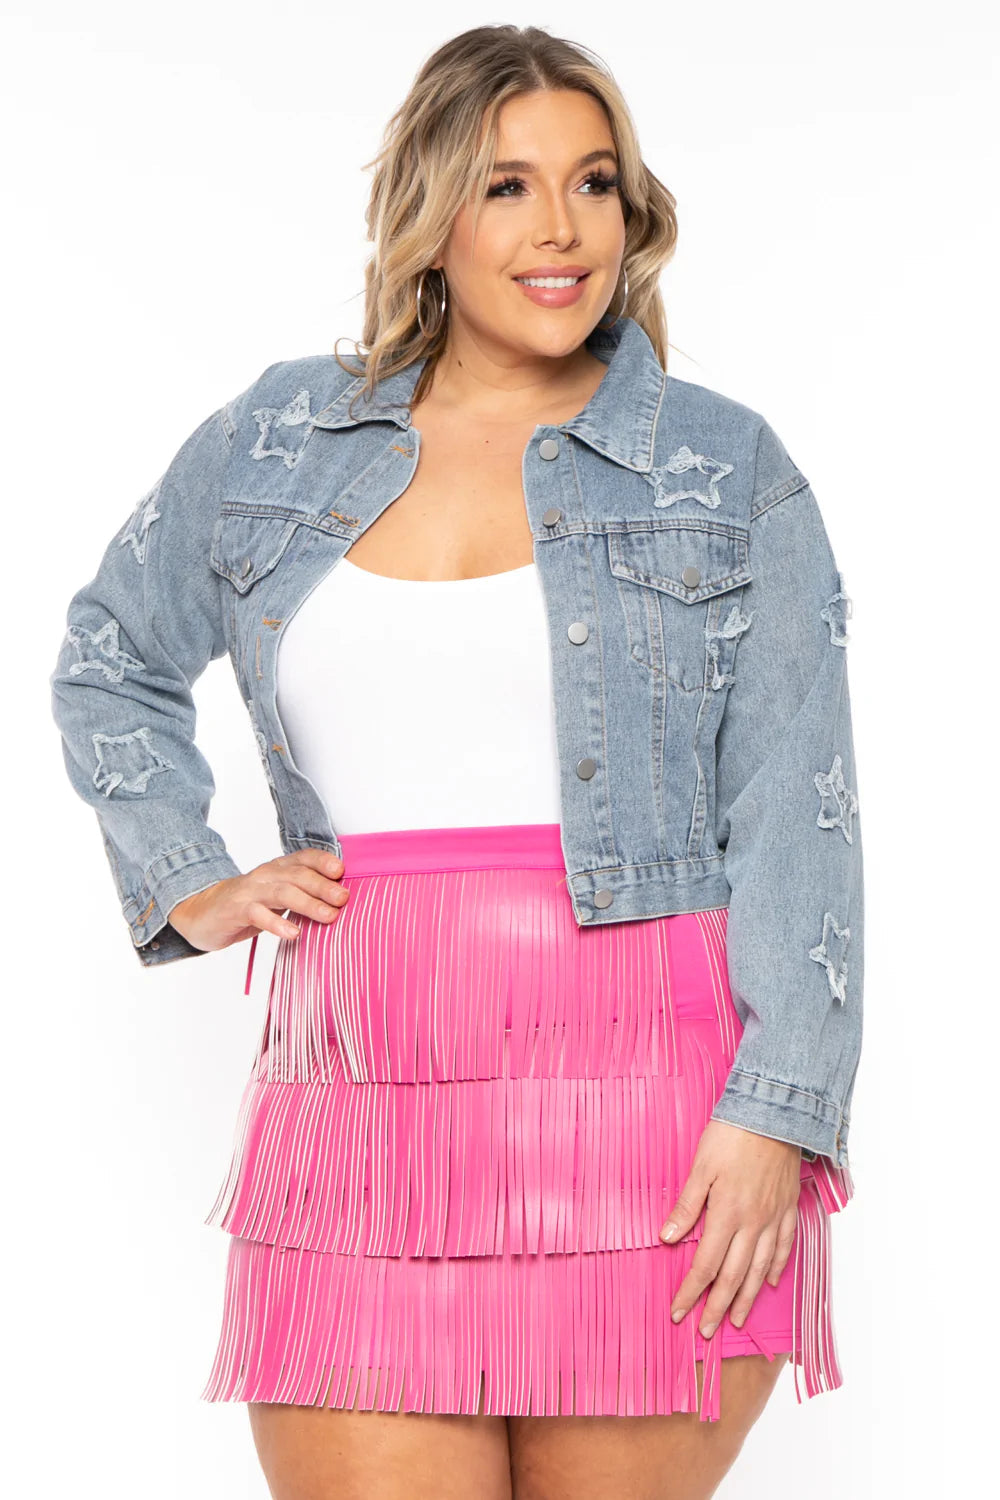 Jade By Jane Bottoms Plus Size Faux Leather Fringe Mini Skirt - Pink